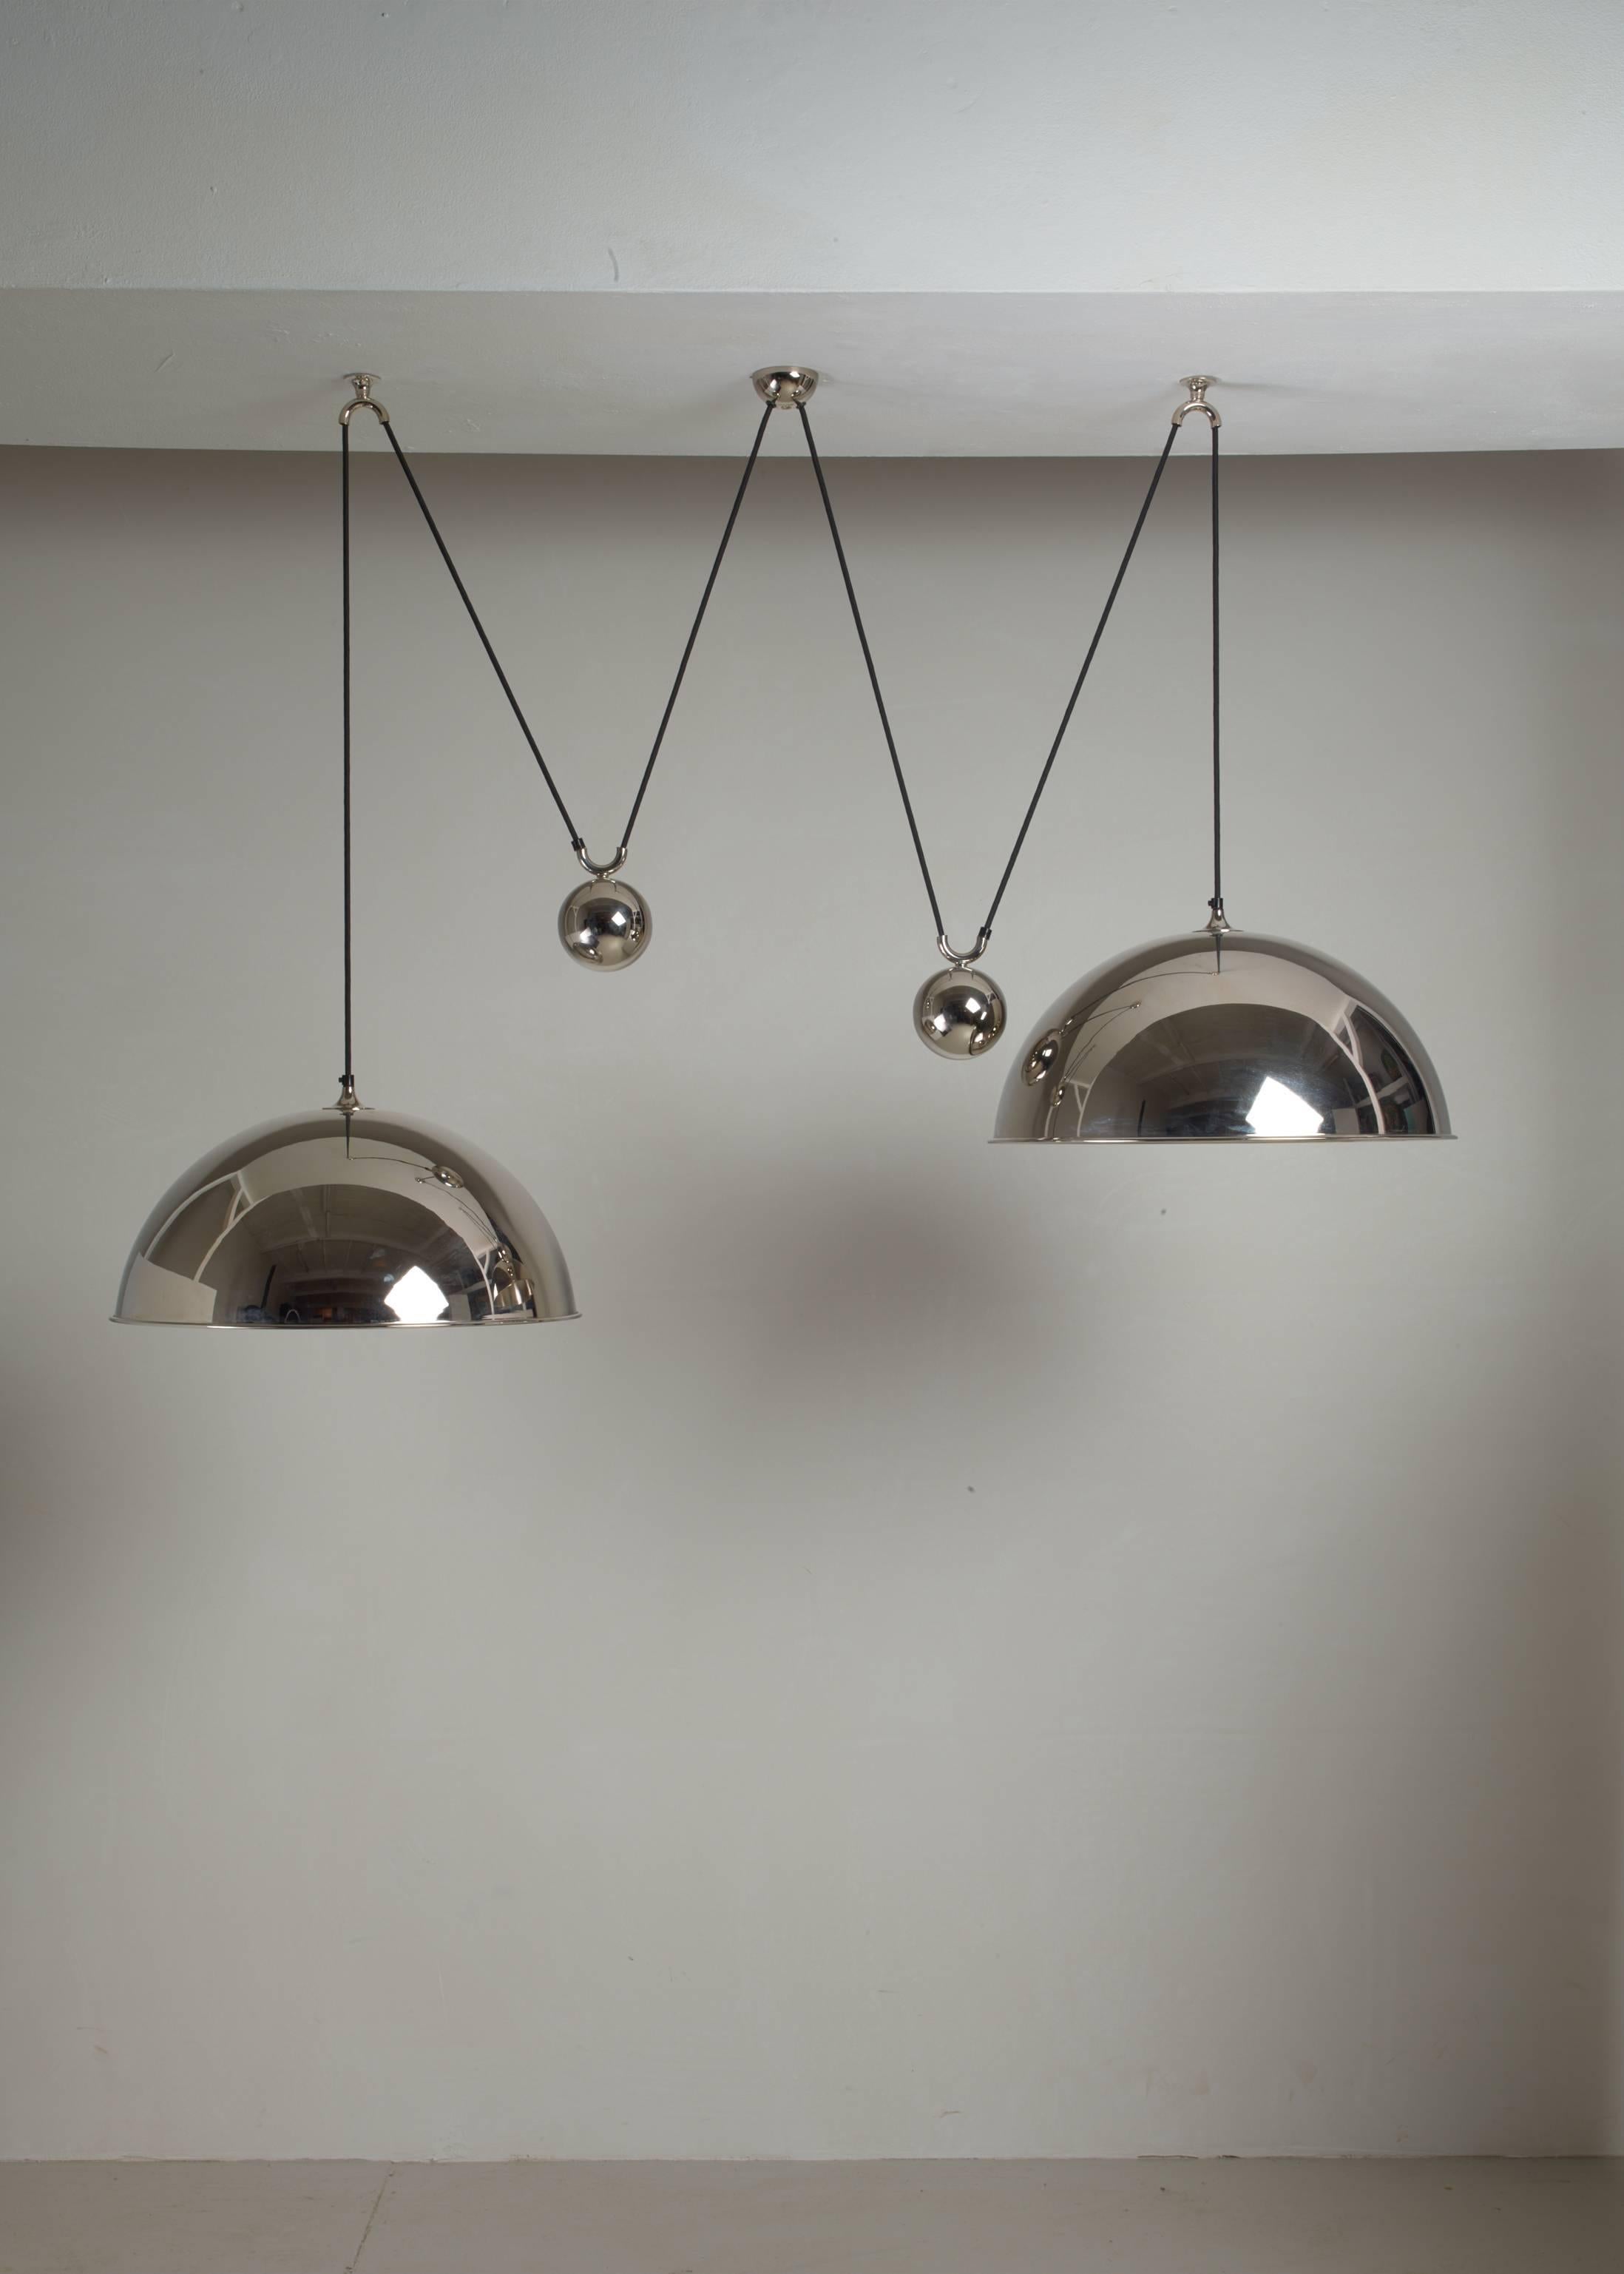 Mid-Century Modern Florian Schulz Double Nickel Posa Pendants with Counterweights, Germany